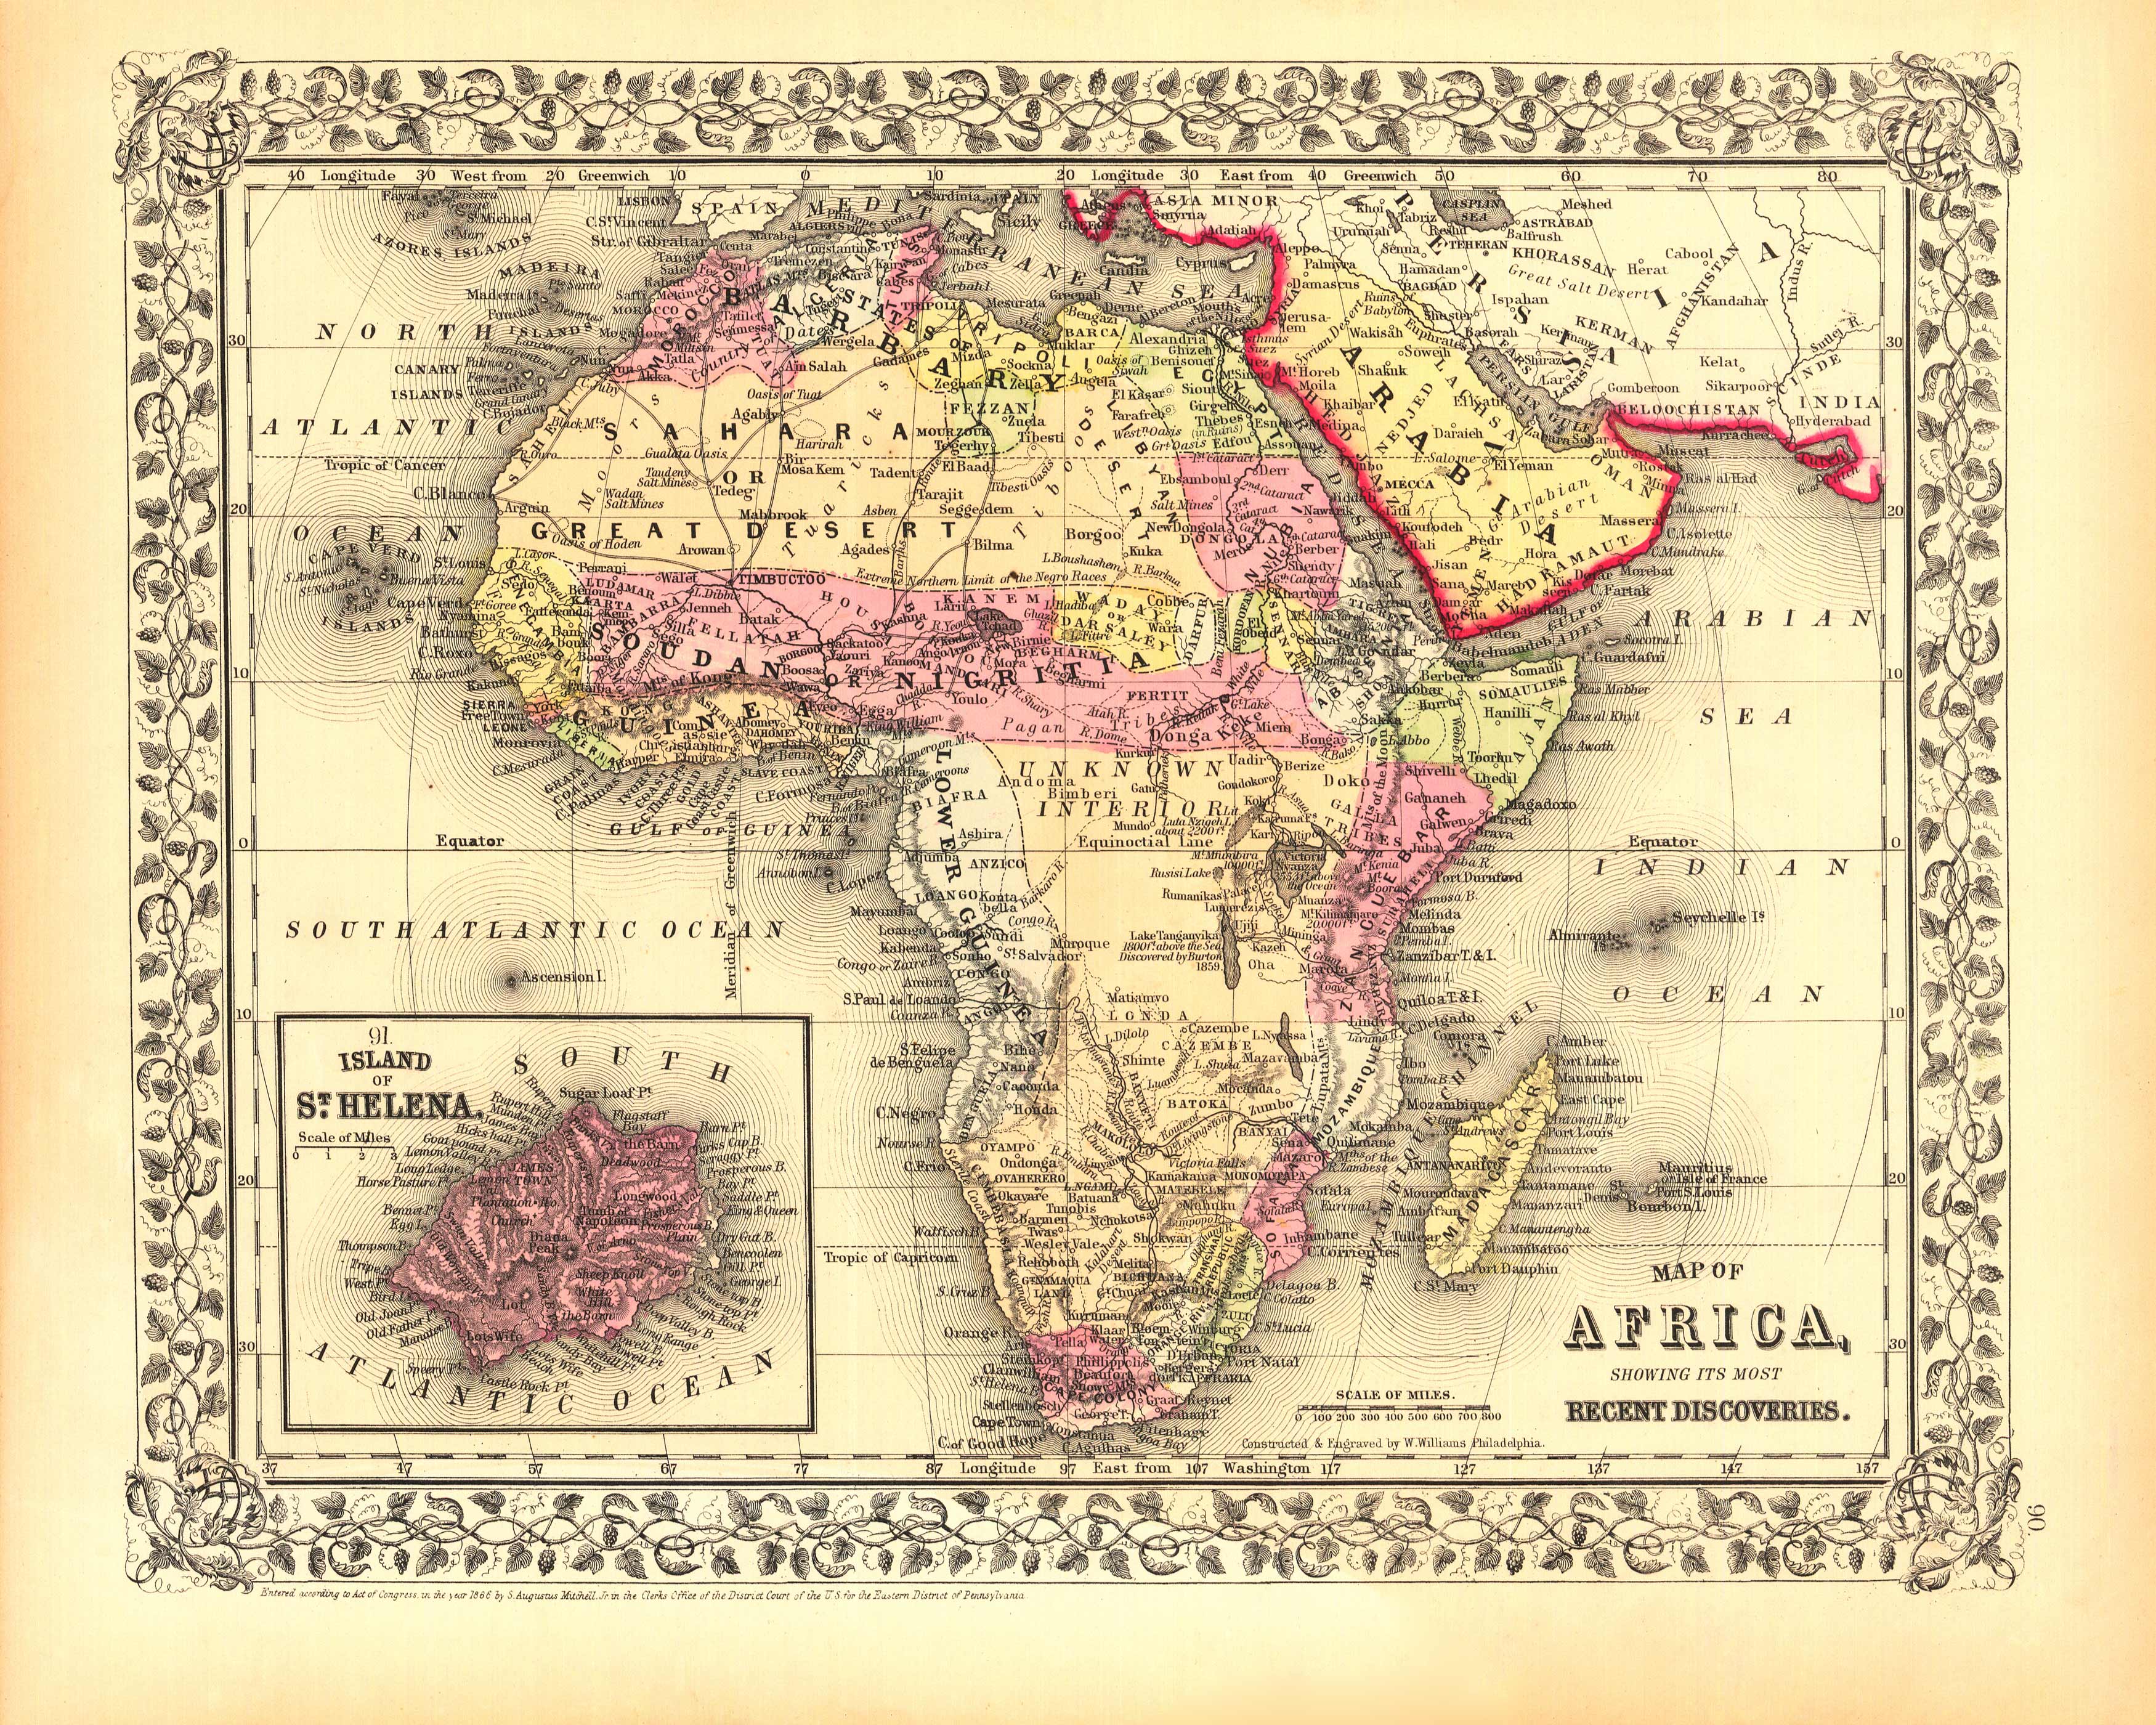 Map Of Africa Showing Its Most Recent Discoveries With An Inset Map Of The Island Of St Helena